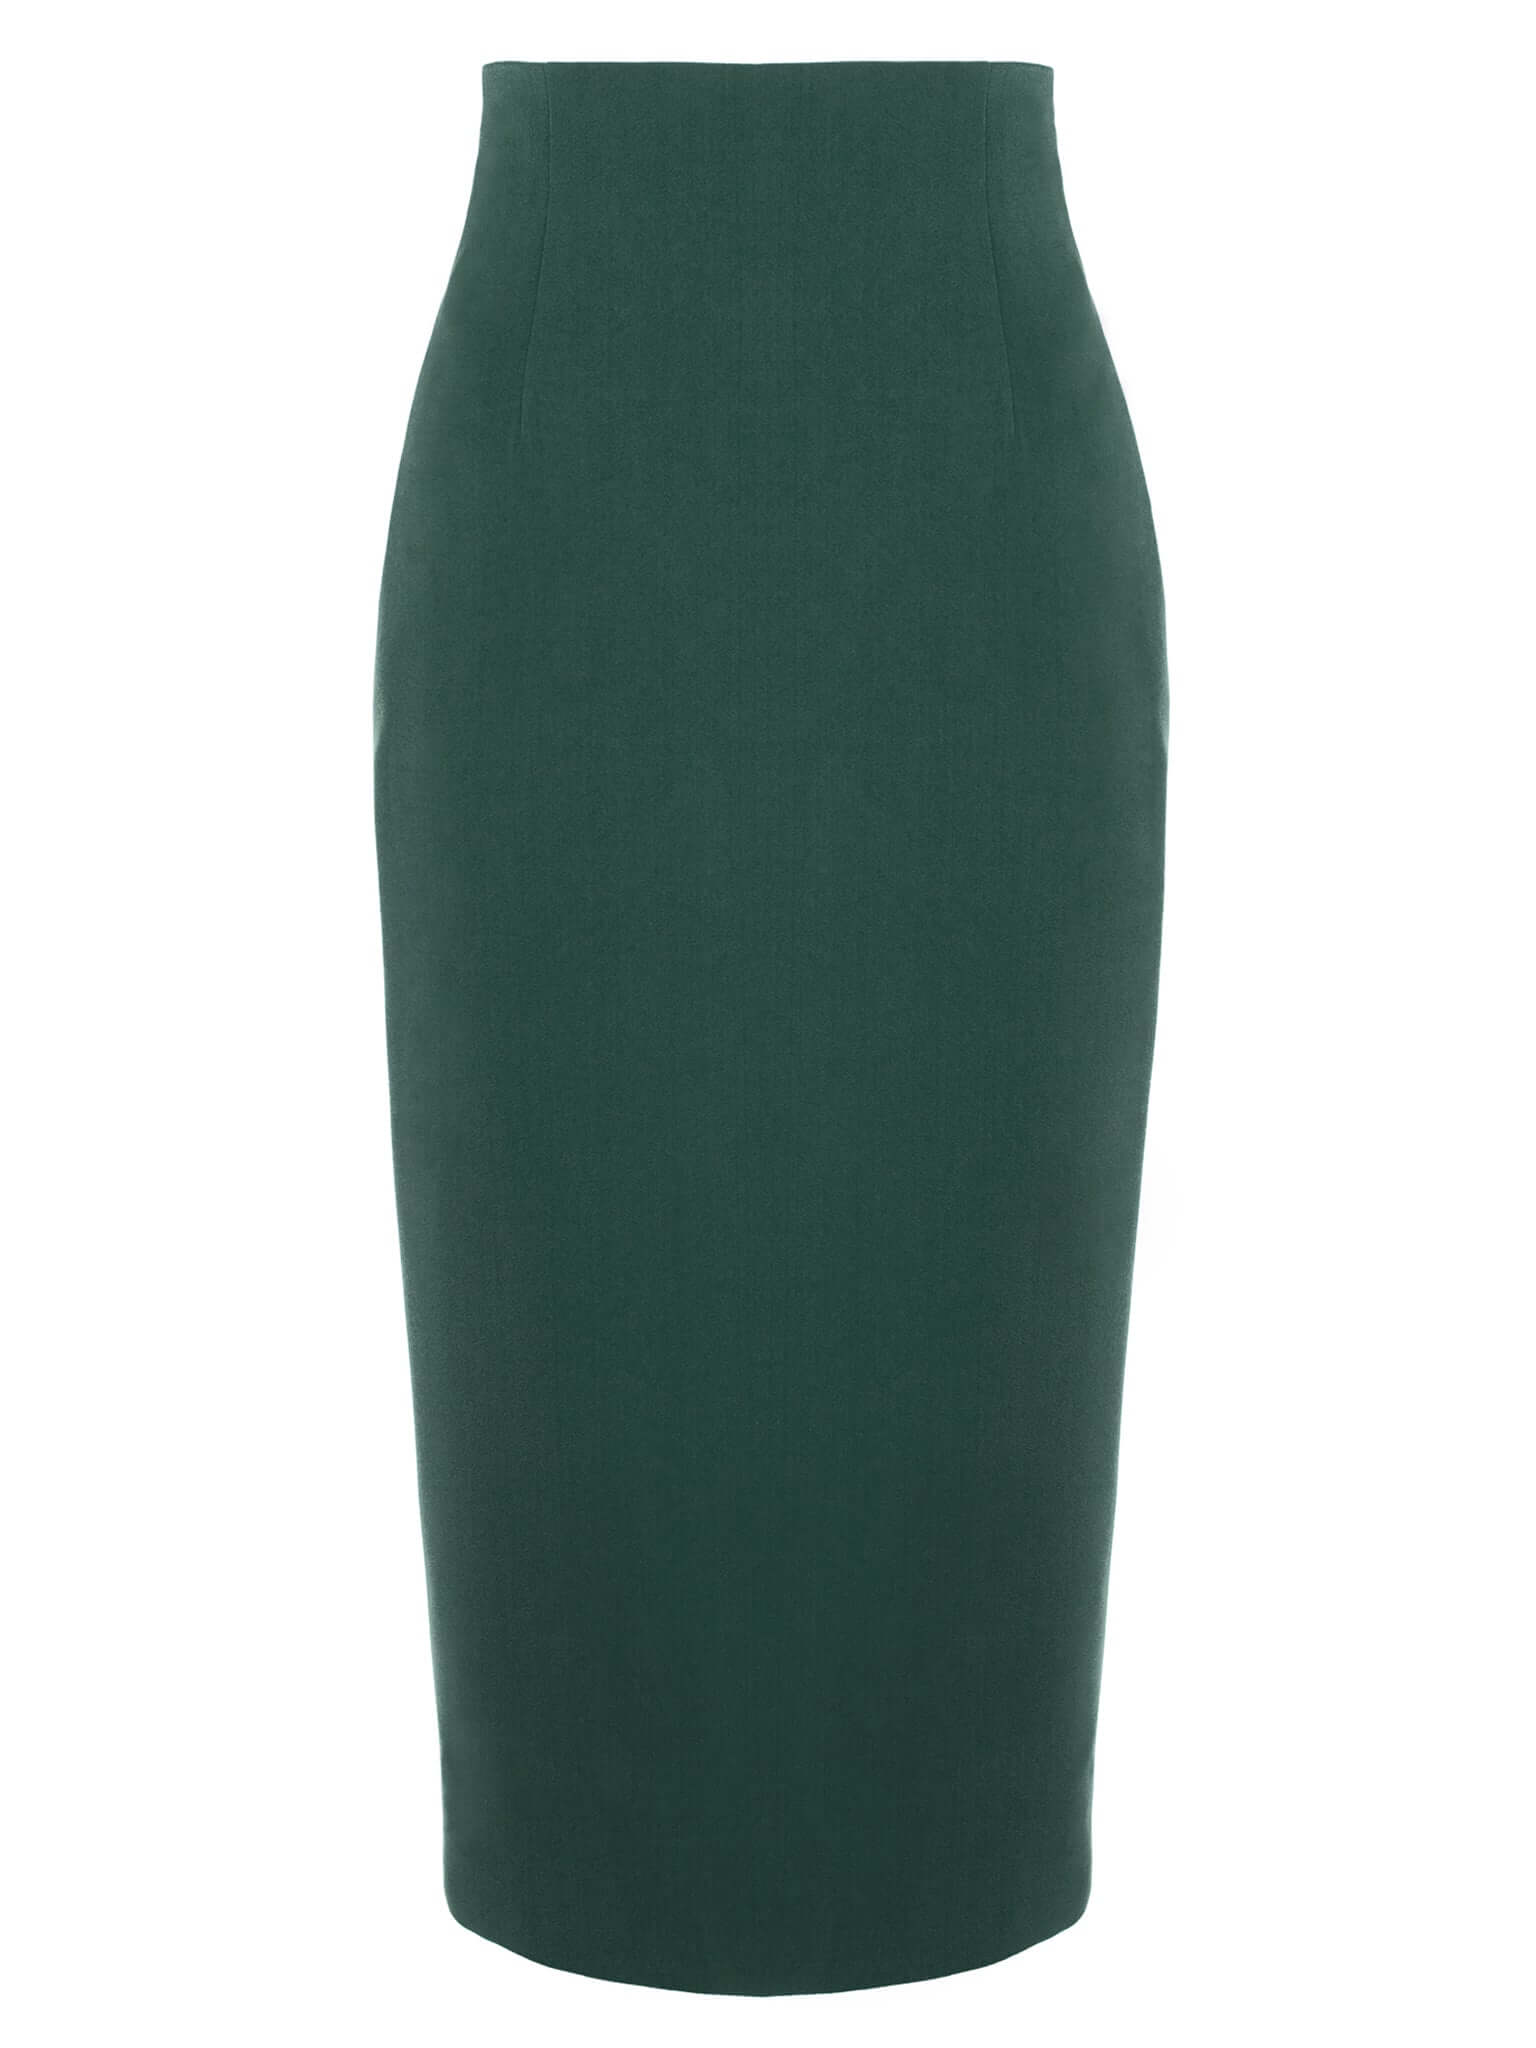 Tia Dorraine Emerald Dream Pencil High-Waist Midi Skirt This classic piece is a must-have for the modern businesswoman’s wardrobe. This emerald green pencil skirt with its midi length is a great addition to your office wear collection.